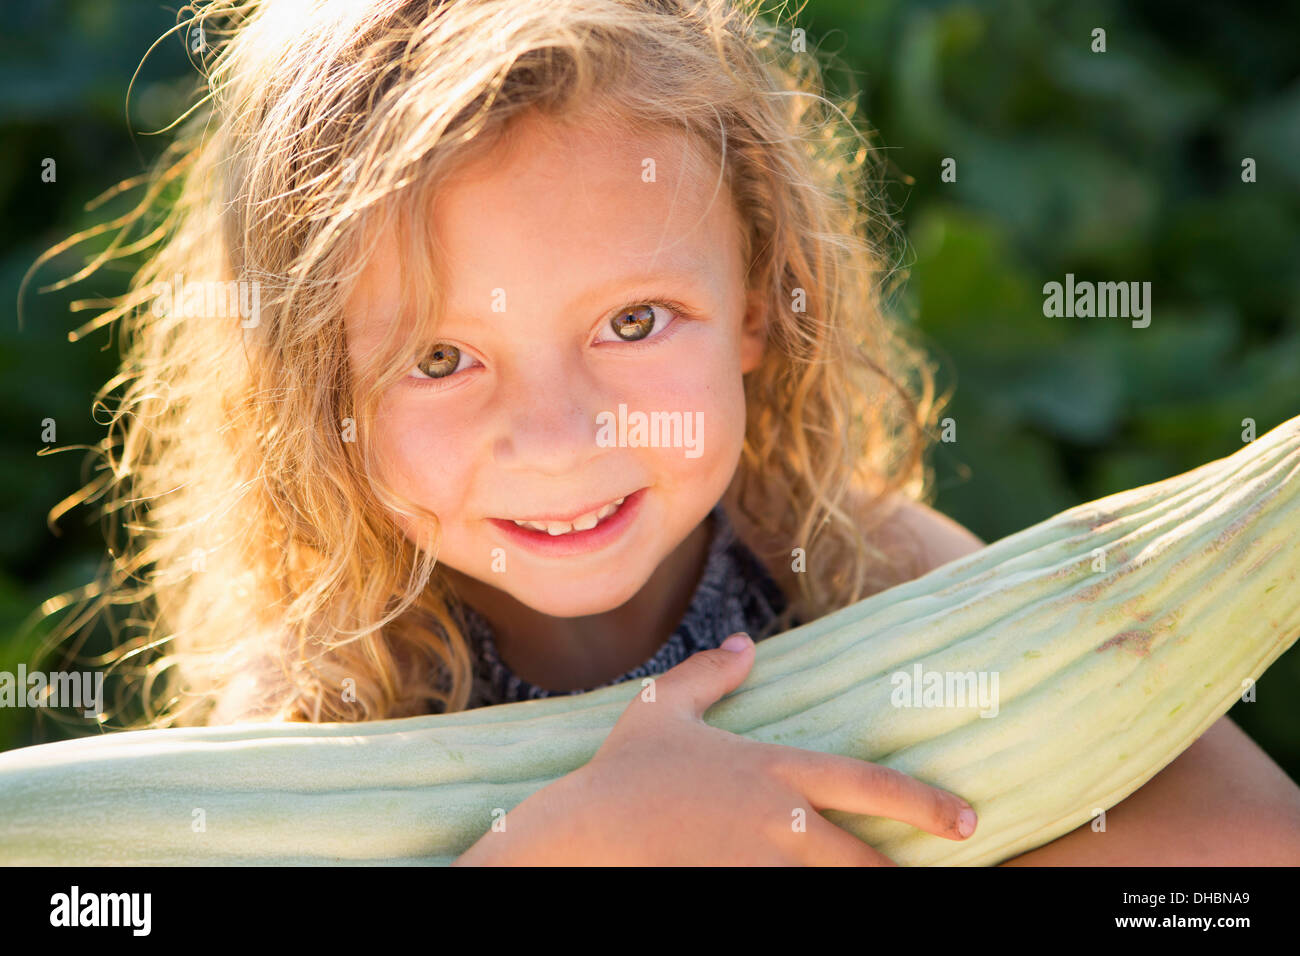 A young girl with long red curly hair outdoors in a garden holding a large fresh corn on the cob. Stock Photo